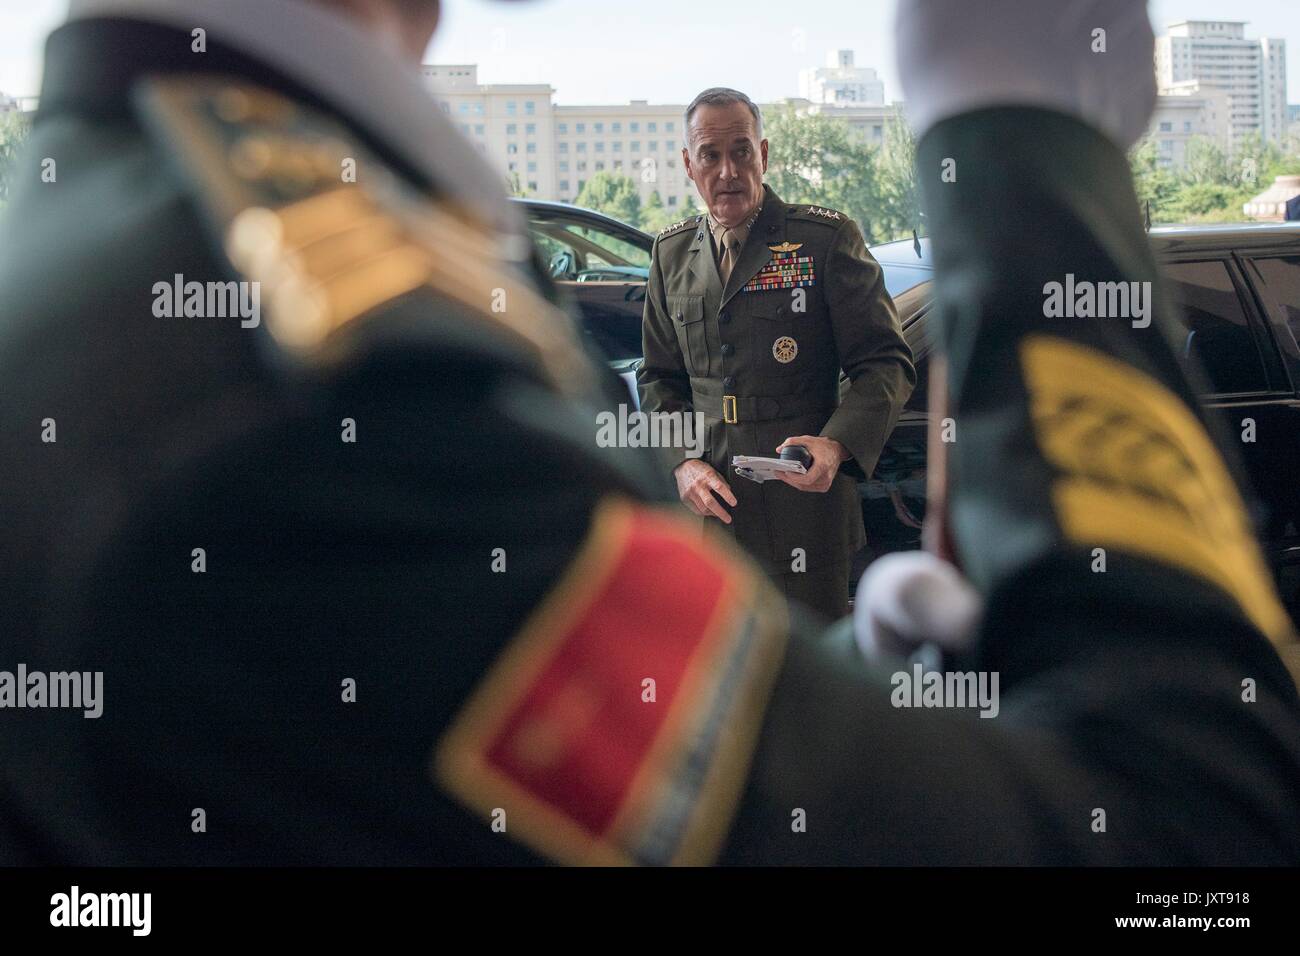 Beijing, China. 17th Aug, 2017. U.S. Chairman of the Joint Chiefs Gen. Joseph Dunford arrives for a meeting with Chinese Gen. Fan Chanlong, vice chairman of the Central Military Commission, at the headquarters of the Peoples Liberation Army August 17, 2017 in Beijing, China. Dunford is in China to discuss defusing the situation in North Korea. Credit: Planetpix/Alamy Live News Stock Photo